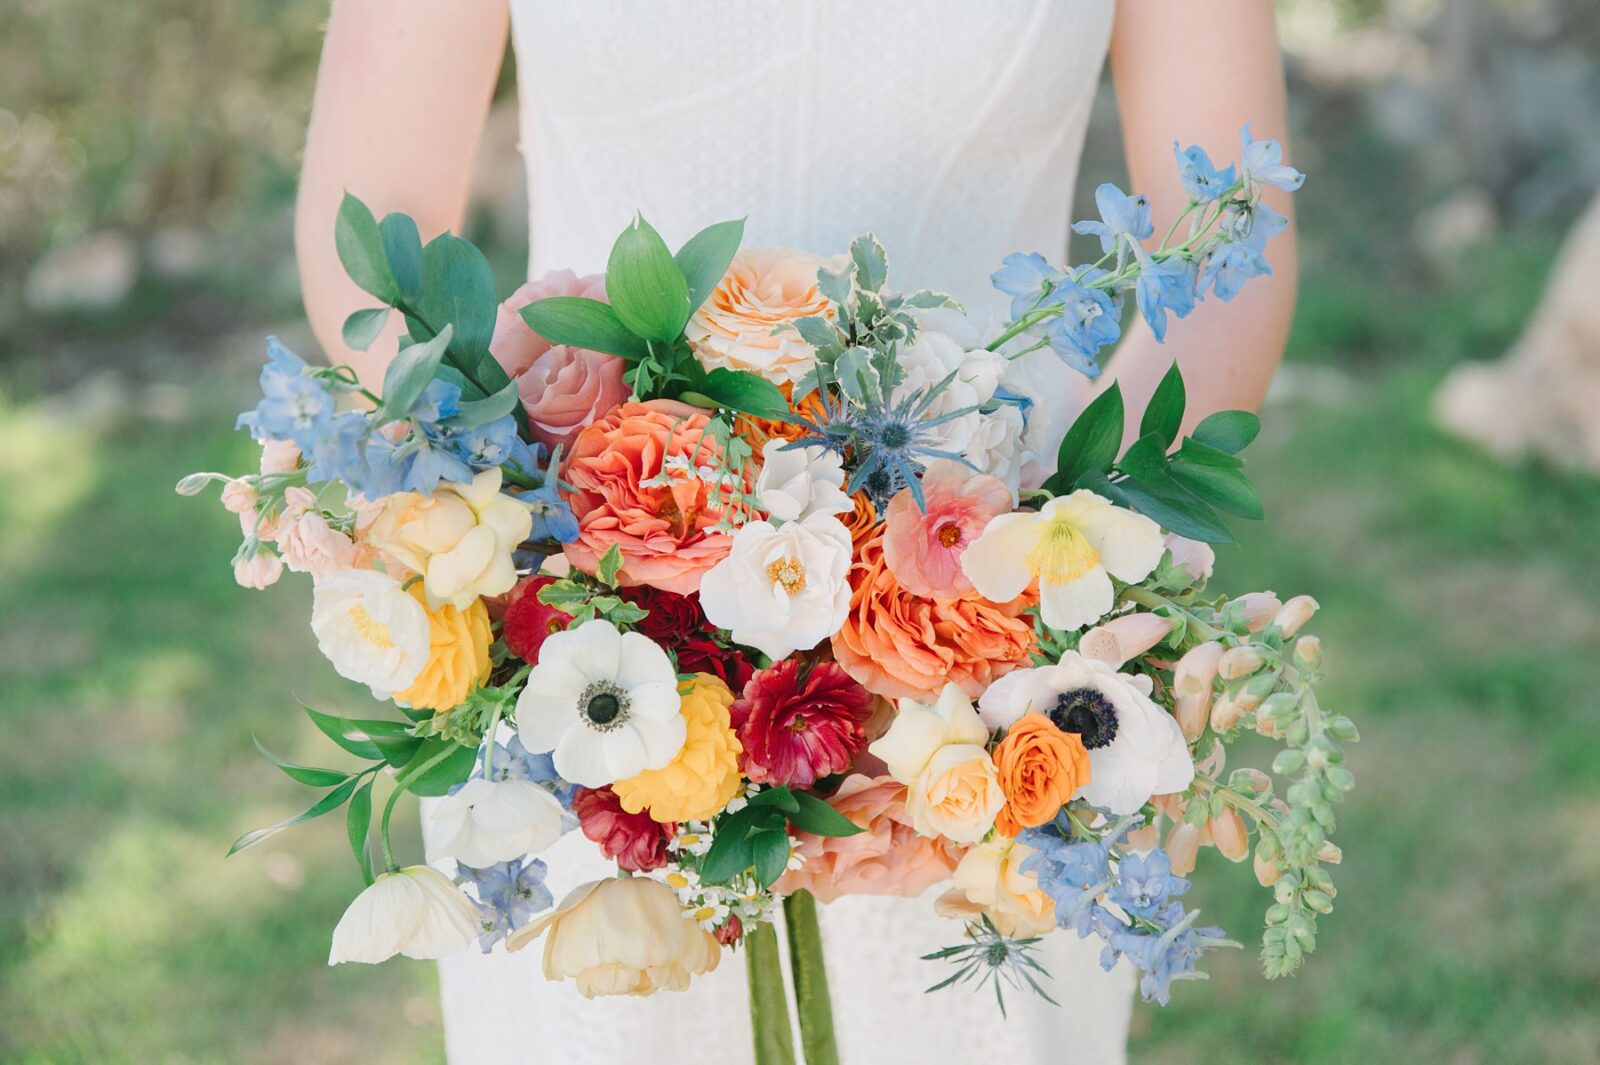 perry's petals, spring wedding bouquet, colorful bridal bouquet, rainbow wedding bouquet, wedding at the videre estate venue, wimberley, photos by Tara Lyons Photography, Perry's Petal, planning by sweet magnolia events